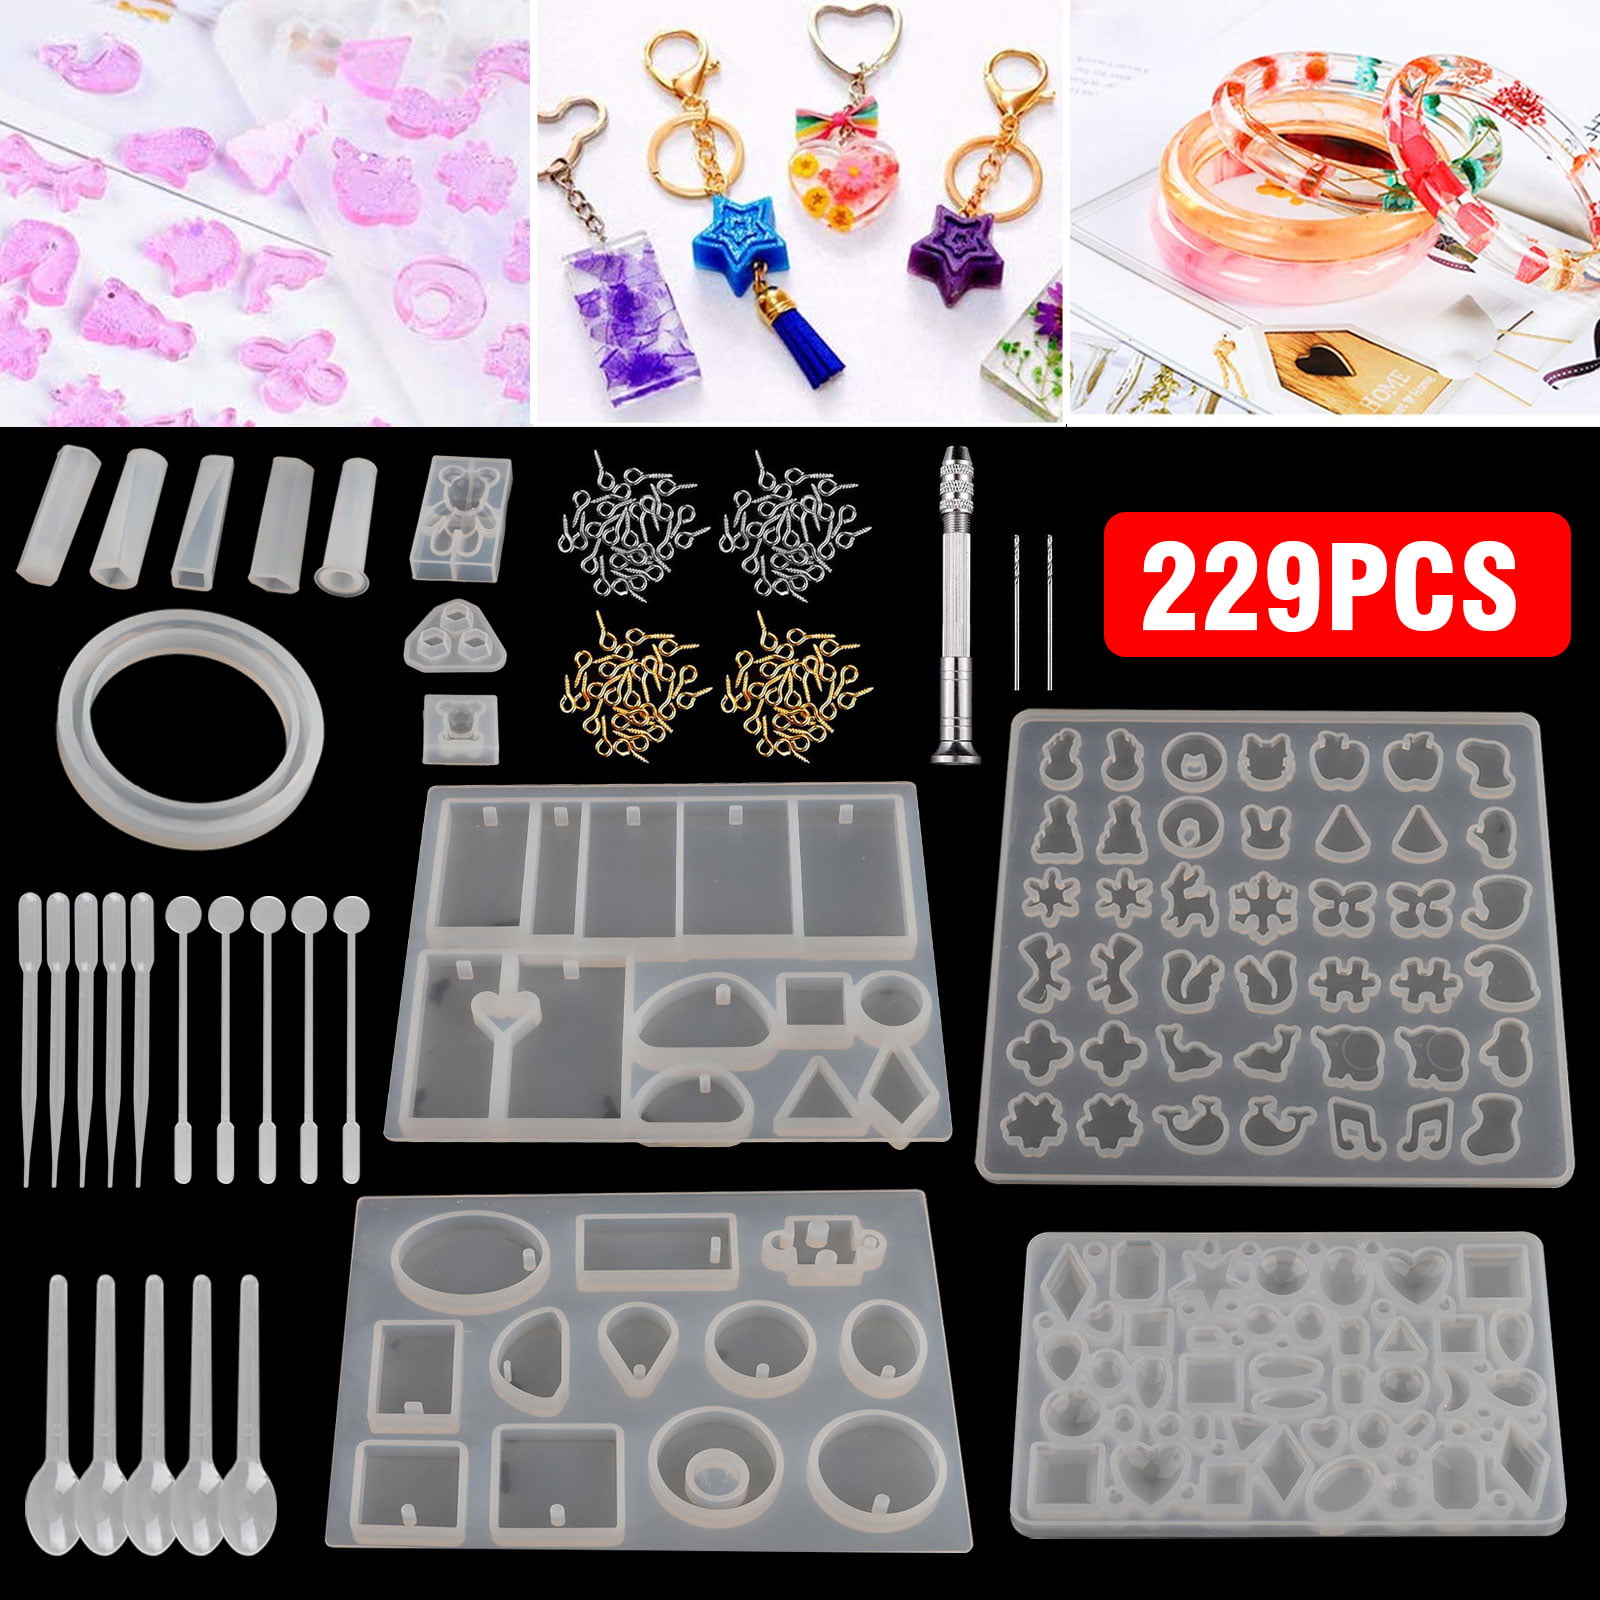 Earring Glitter Powder Teexpert Resin Jewelry Molds Silicone Casting Molds Tool Sets Epoxy Resin Molds Jewelry Making Kit,DIY Jewelry Pendant Craft Making Set Contains Resin Molds 